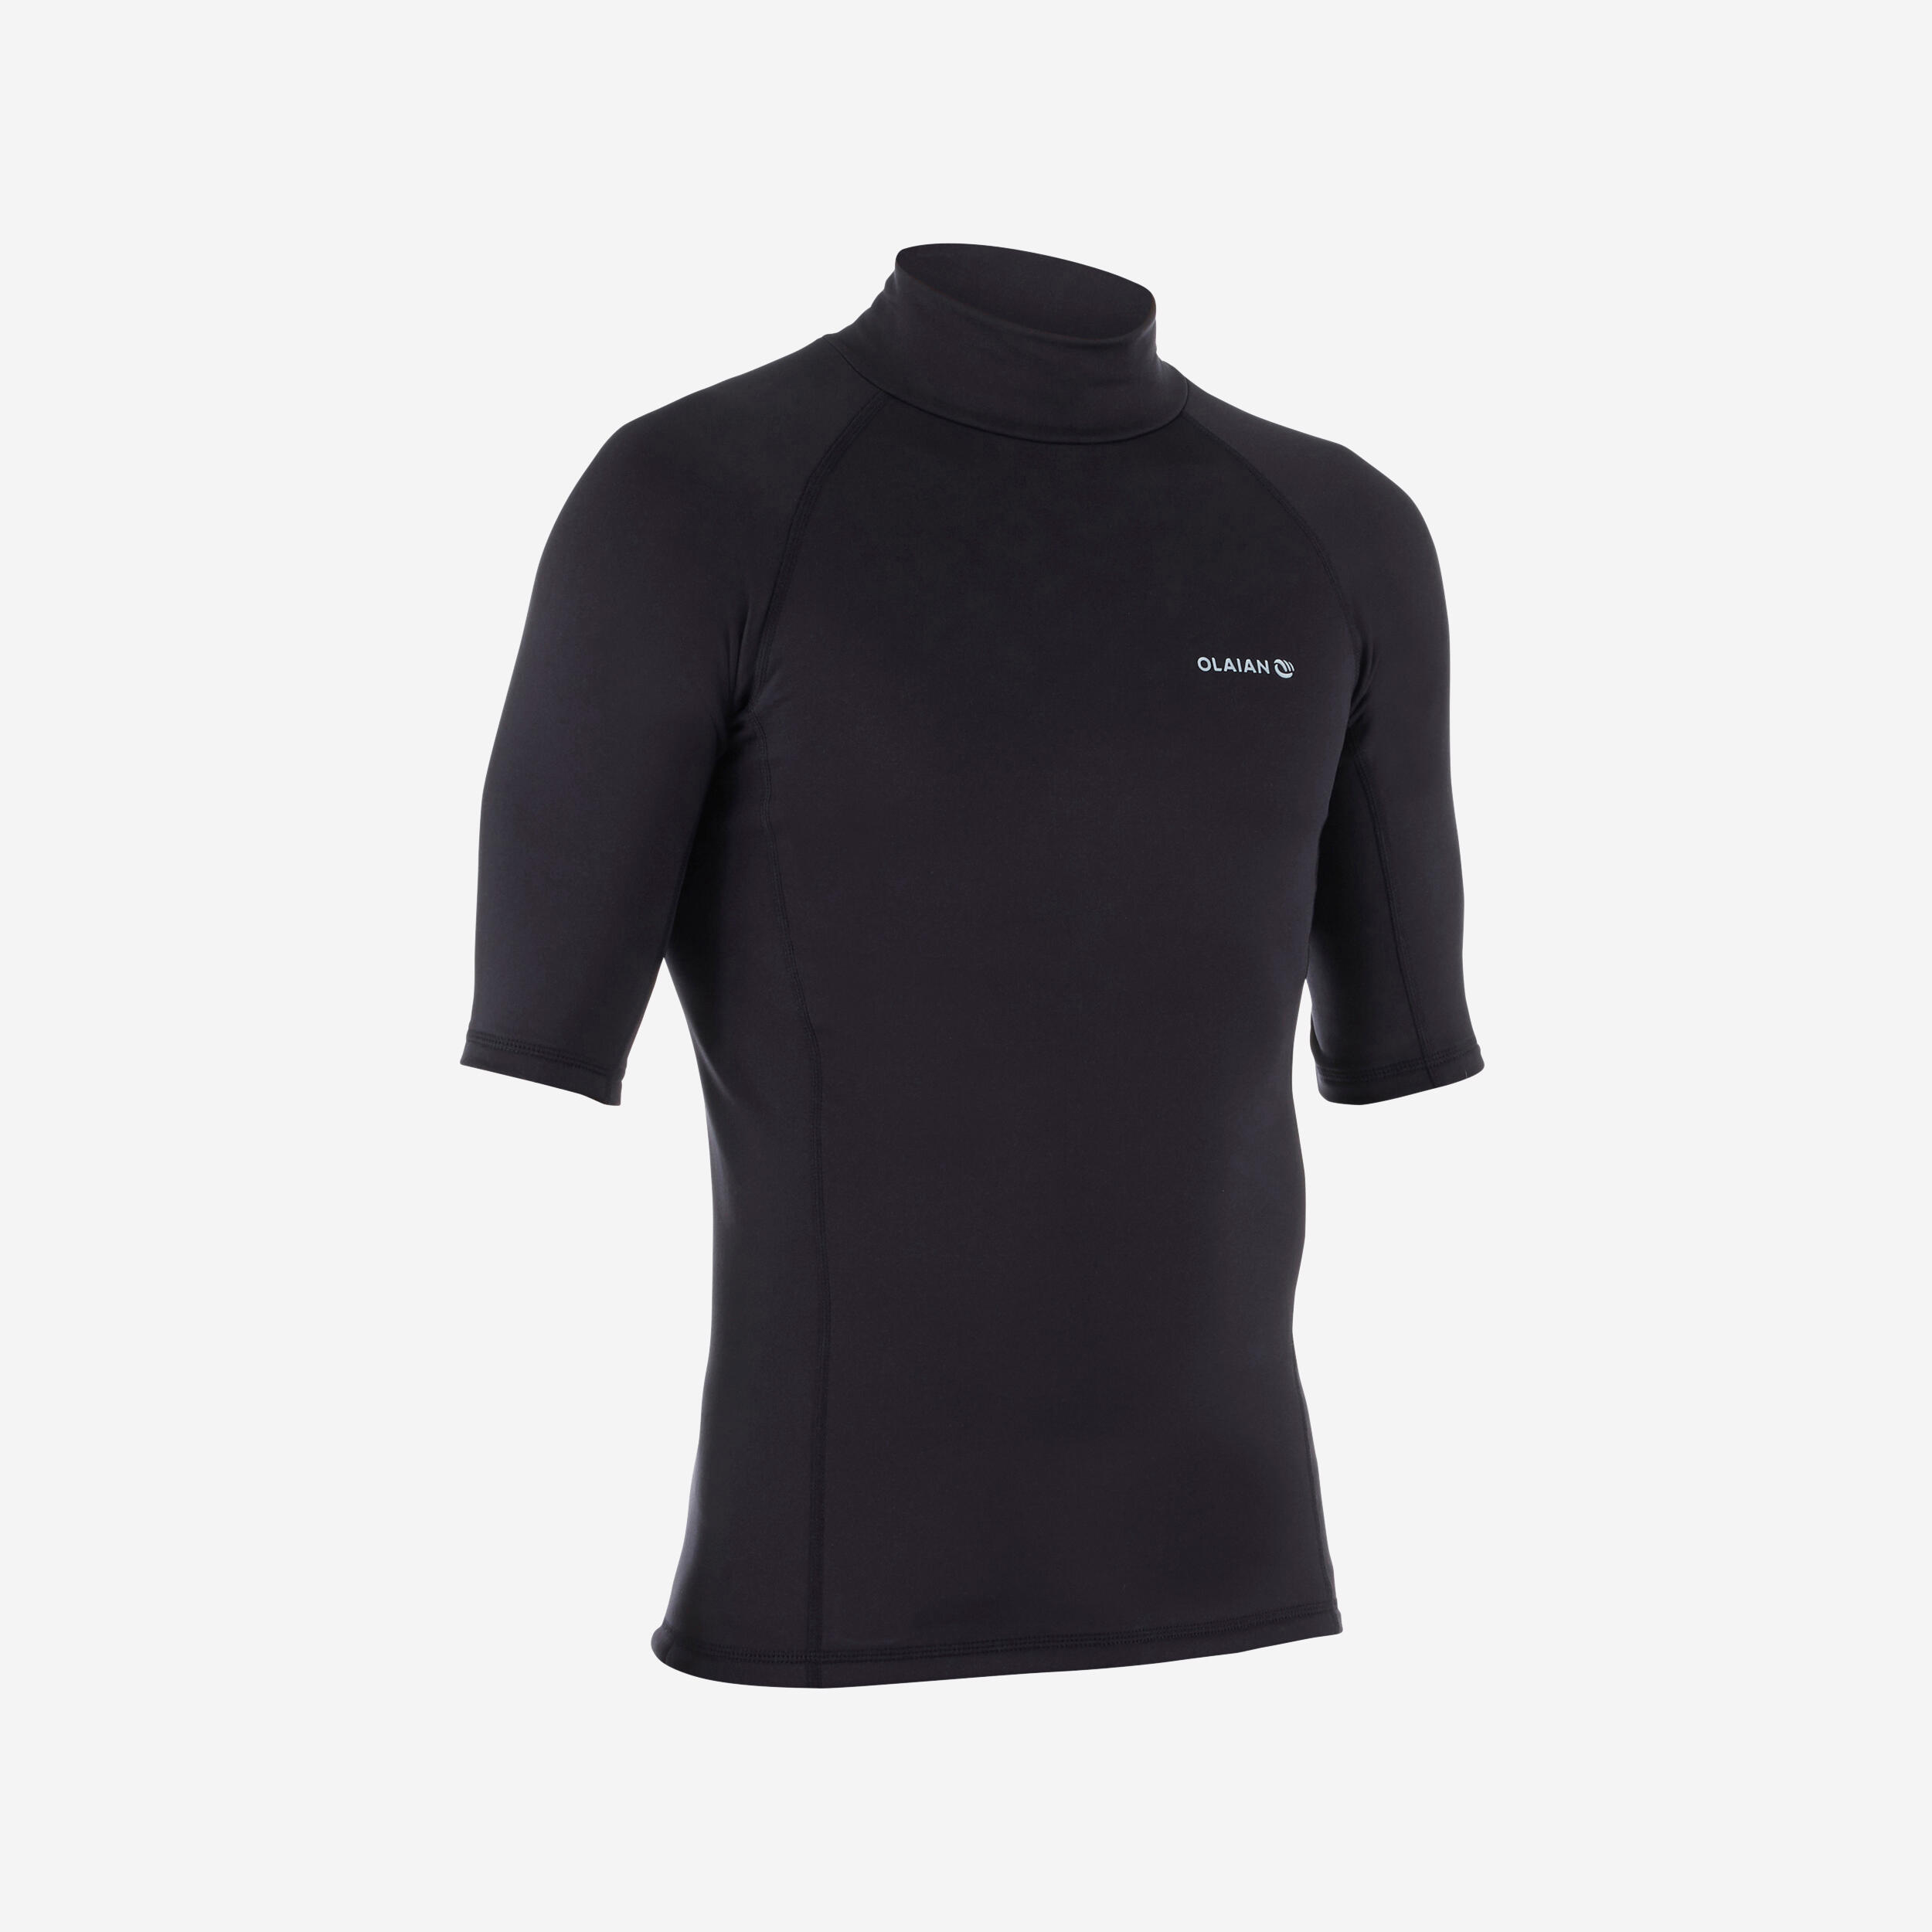 Tee shirt surf thermique 900 polaire 